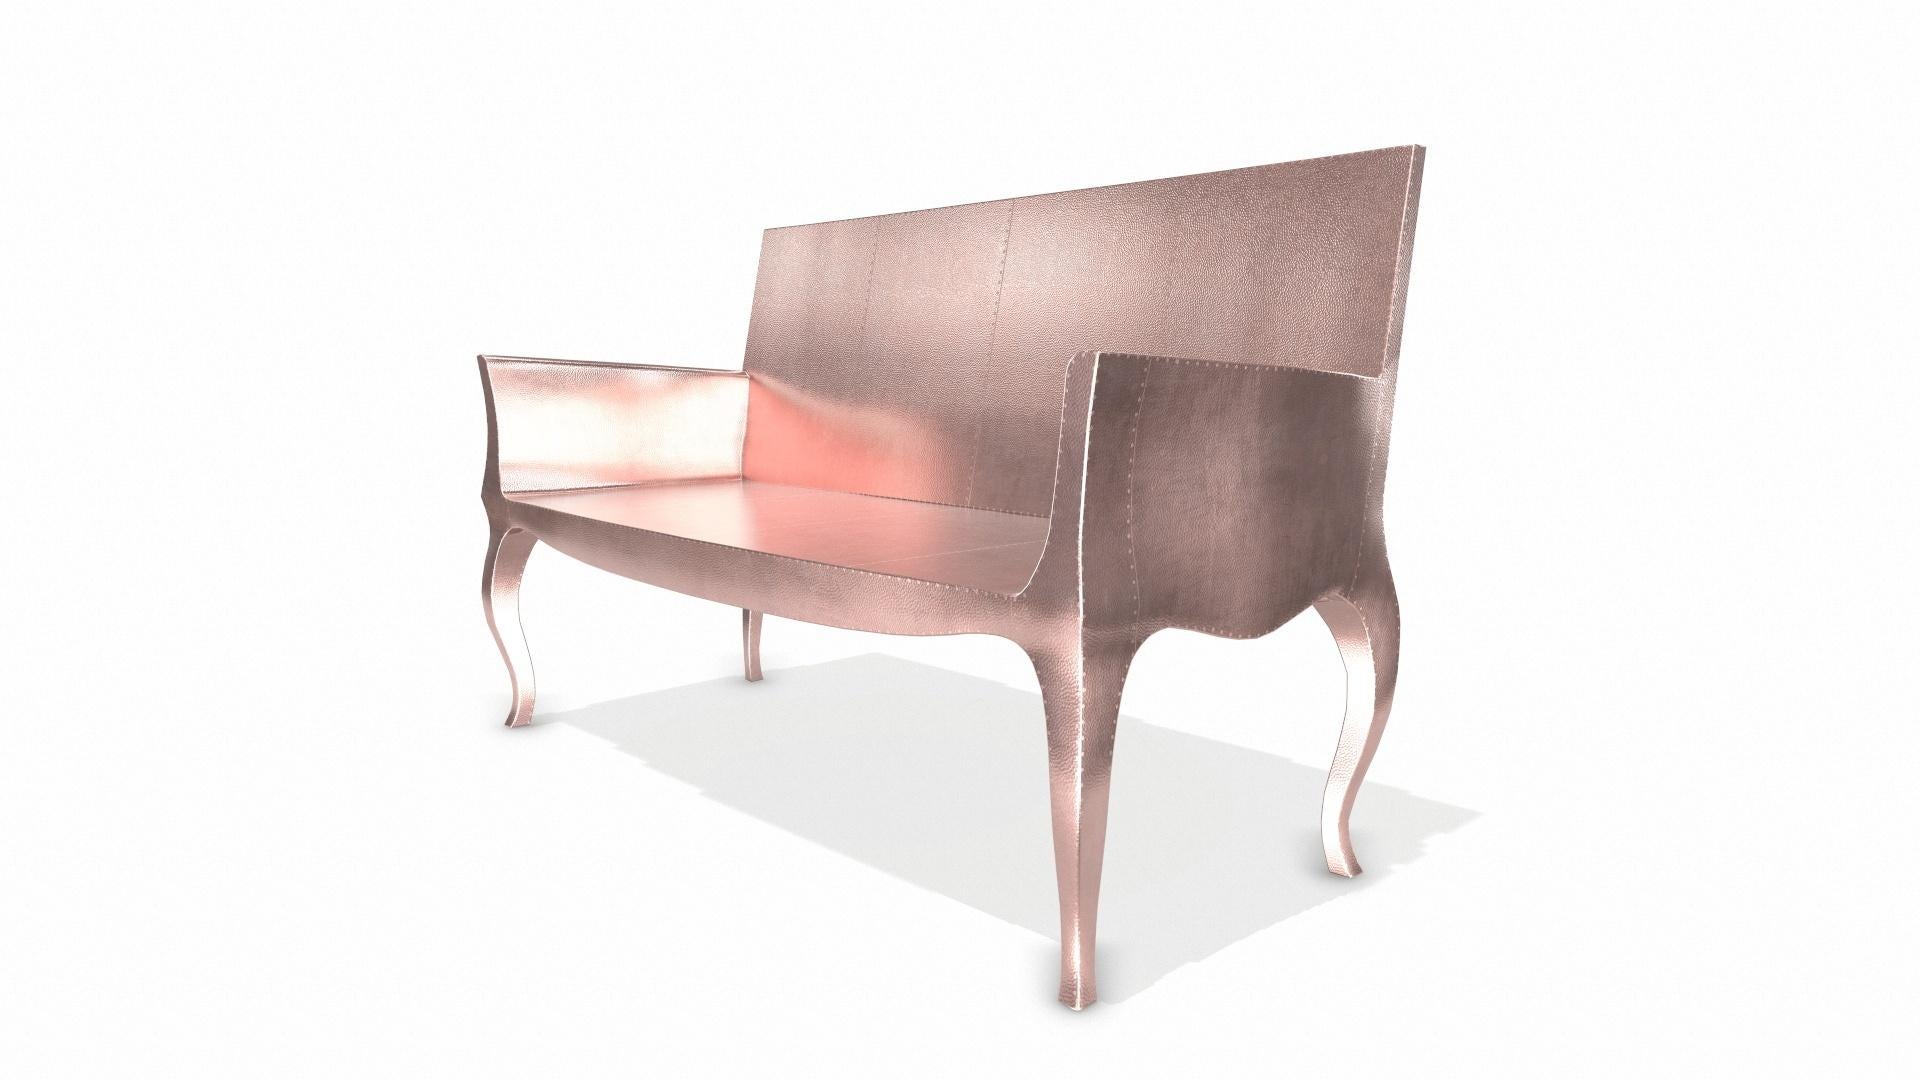 Hand-Crafted Louise Settee Art Deco Loveseats in Mid. Hammered Copper by Paul Mathieu For Sale